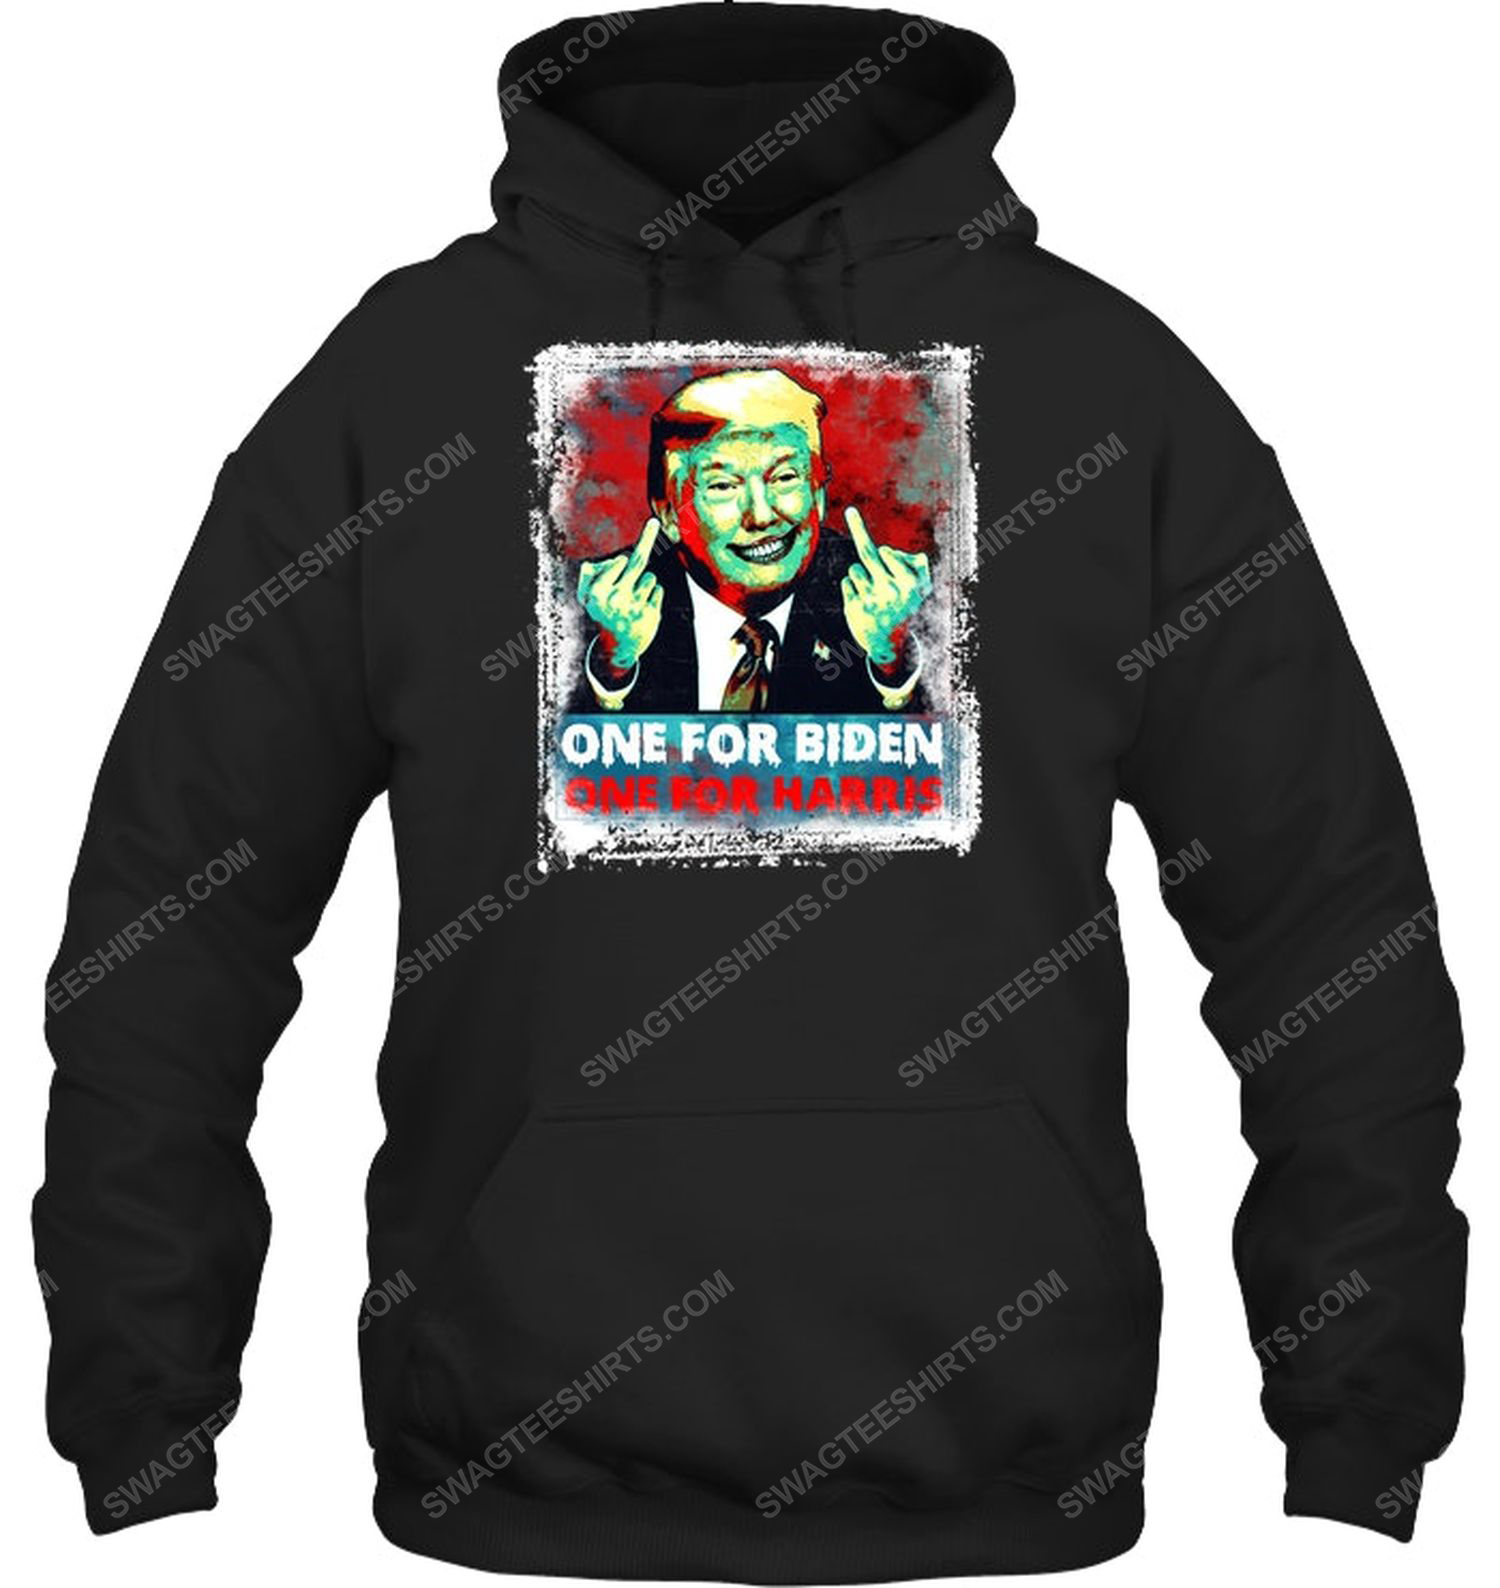 One for biden one for harris trump middle finger political hoodie